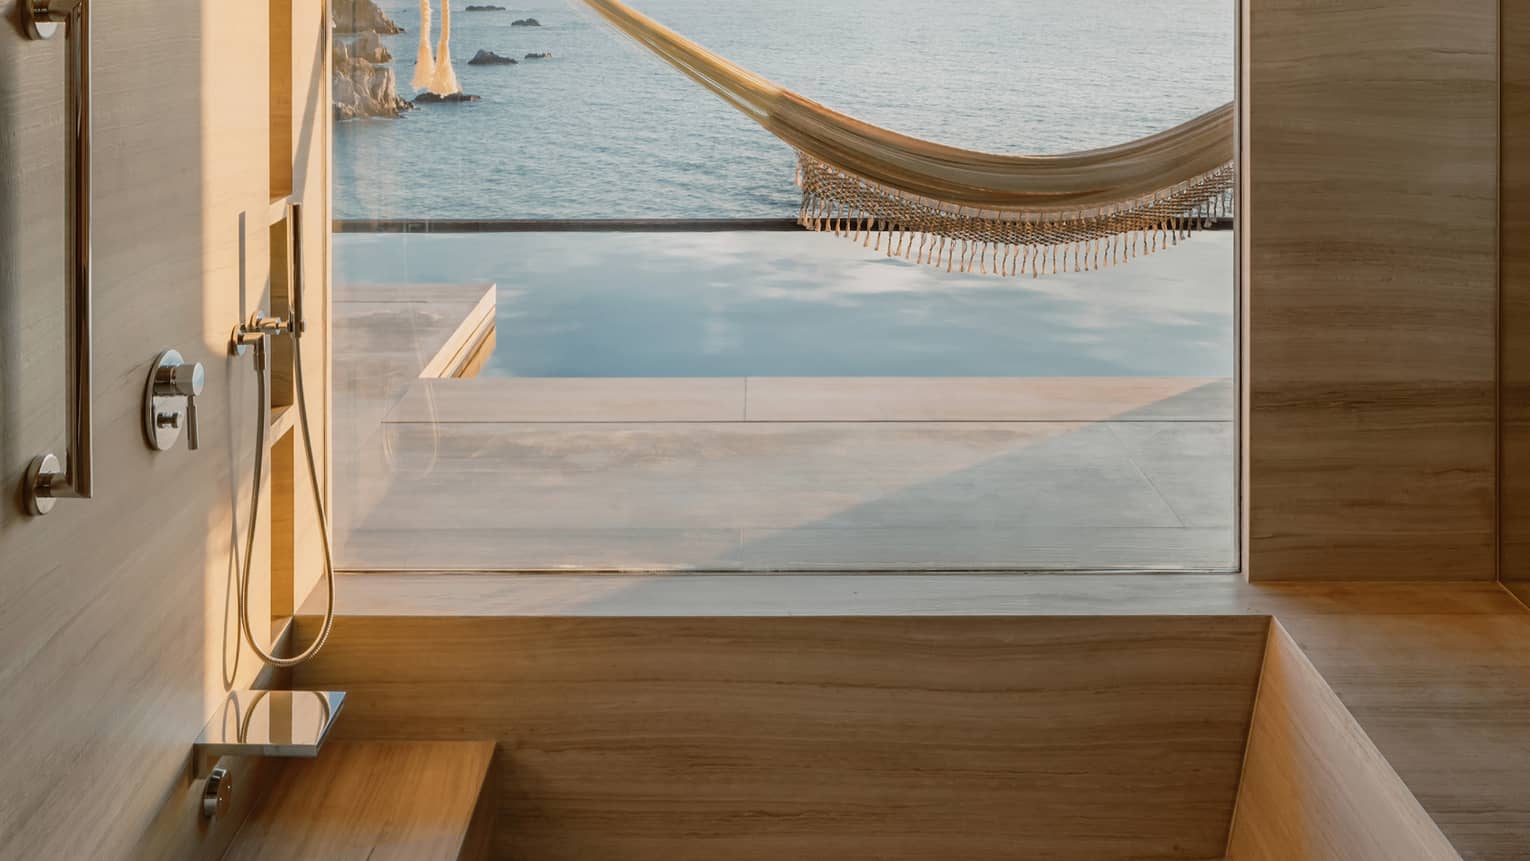 A bathroom opens to an ocean-view terrace with pool and hammock